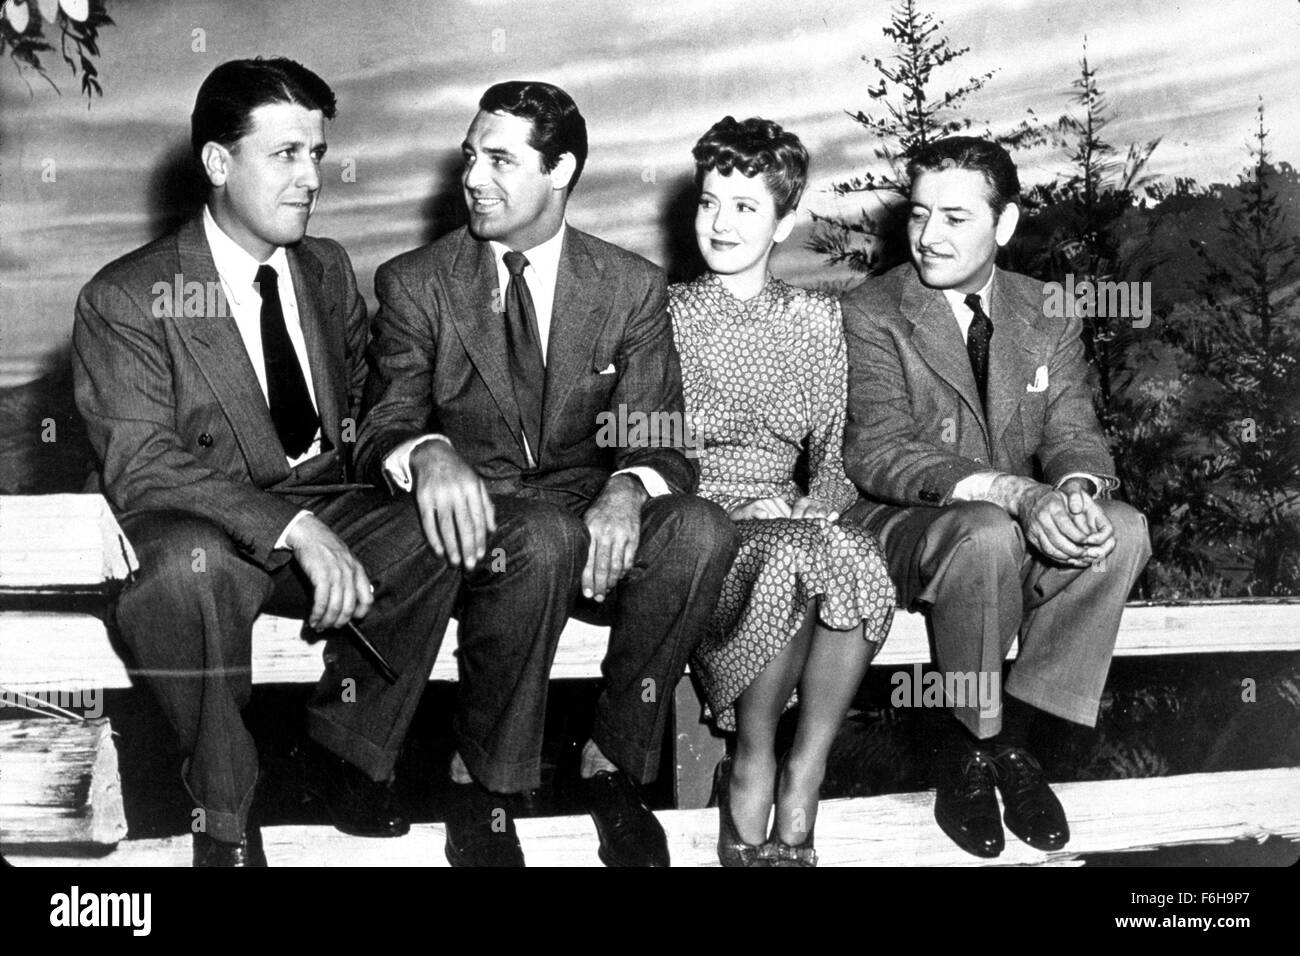 1942, Film Title: TALK OF THE TOWN, Director: GEORGE STEVENS, Studio: COLUMBIA, Pictured: JEAN ARTHUR, RONALD COLMAN, CARY GRANT, GEORGE STEVENS, SITTING, FENCE, SUIT, DISINTERESTED, DIRECTOR, HAND ON KNEE, STUDIO. (Credit Image: SNAP) Stock Photo